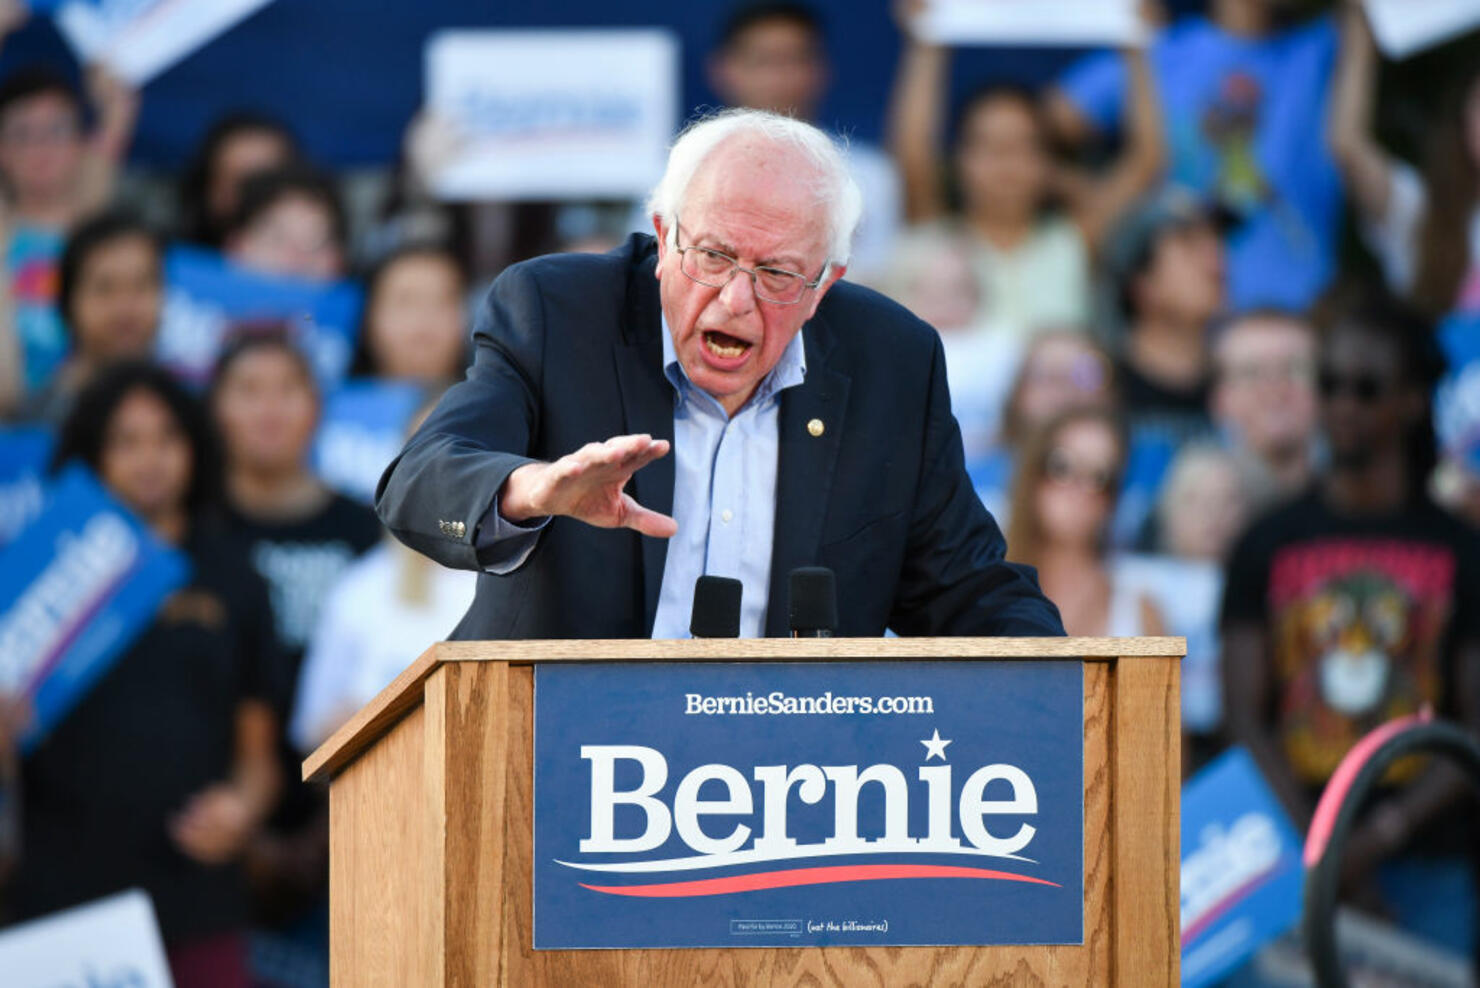 Sen. Bernie Sanders Makes First Campaign Stop In Colorado For 2020 Race